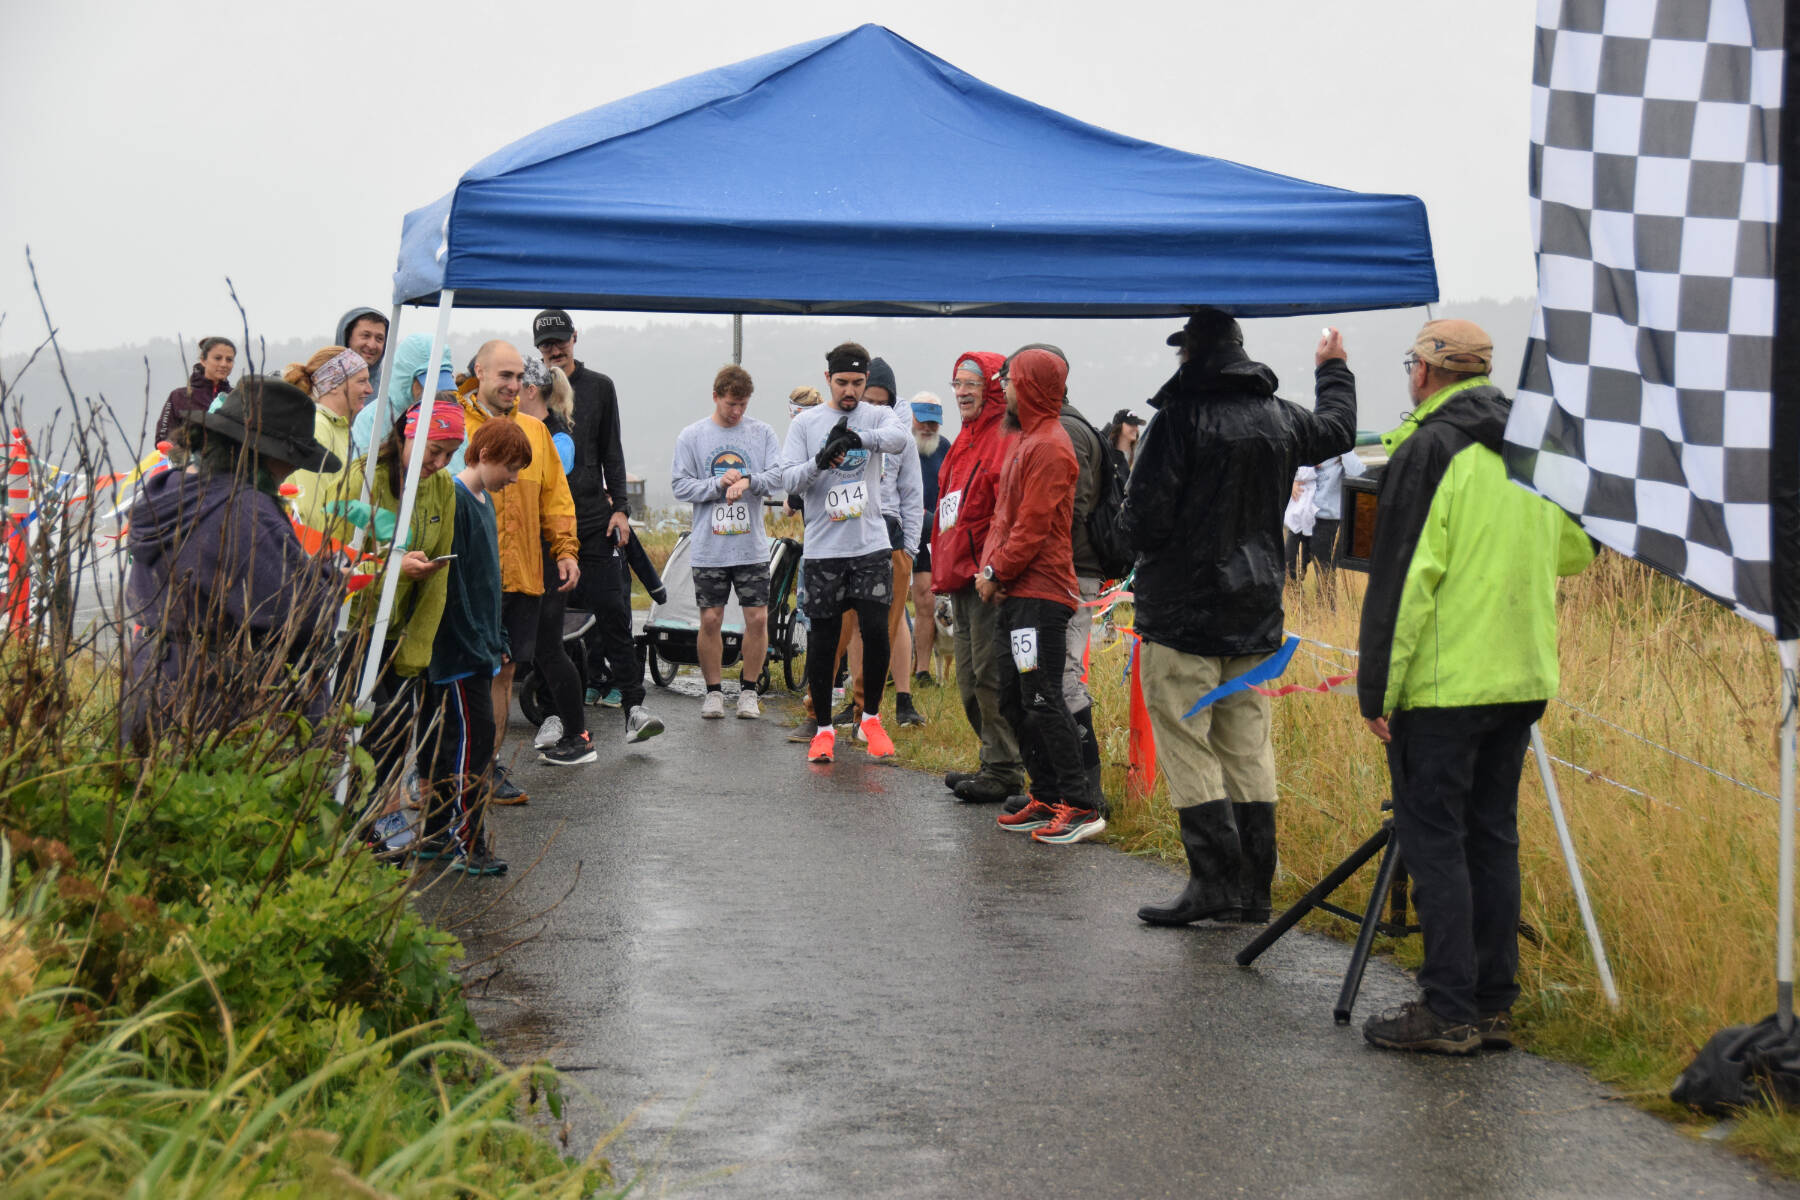 Runners participating in the first annual 5K Run for Recovery gather at the starting line on Saturday, Sept. 16, 2023 in front of Kevin Bell Arena on the Spit in Homer, Alaska. (Delcenia Cosman/Homer News)